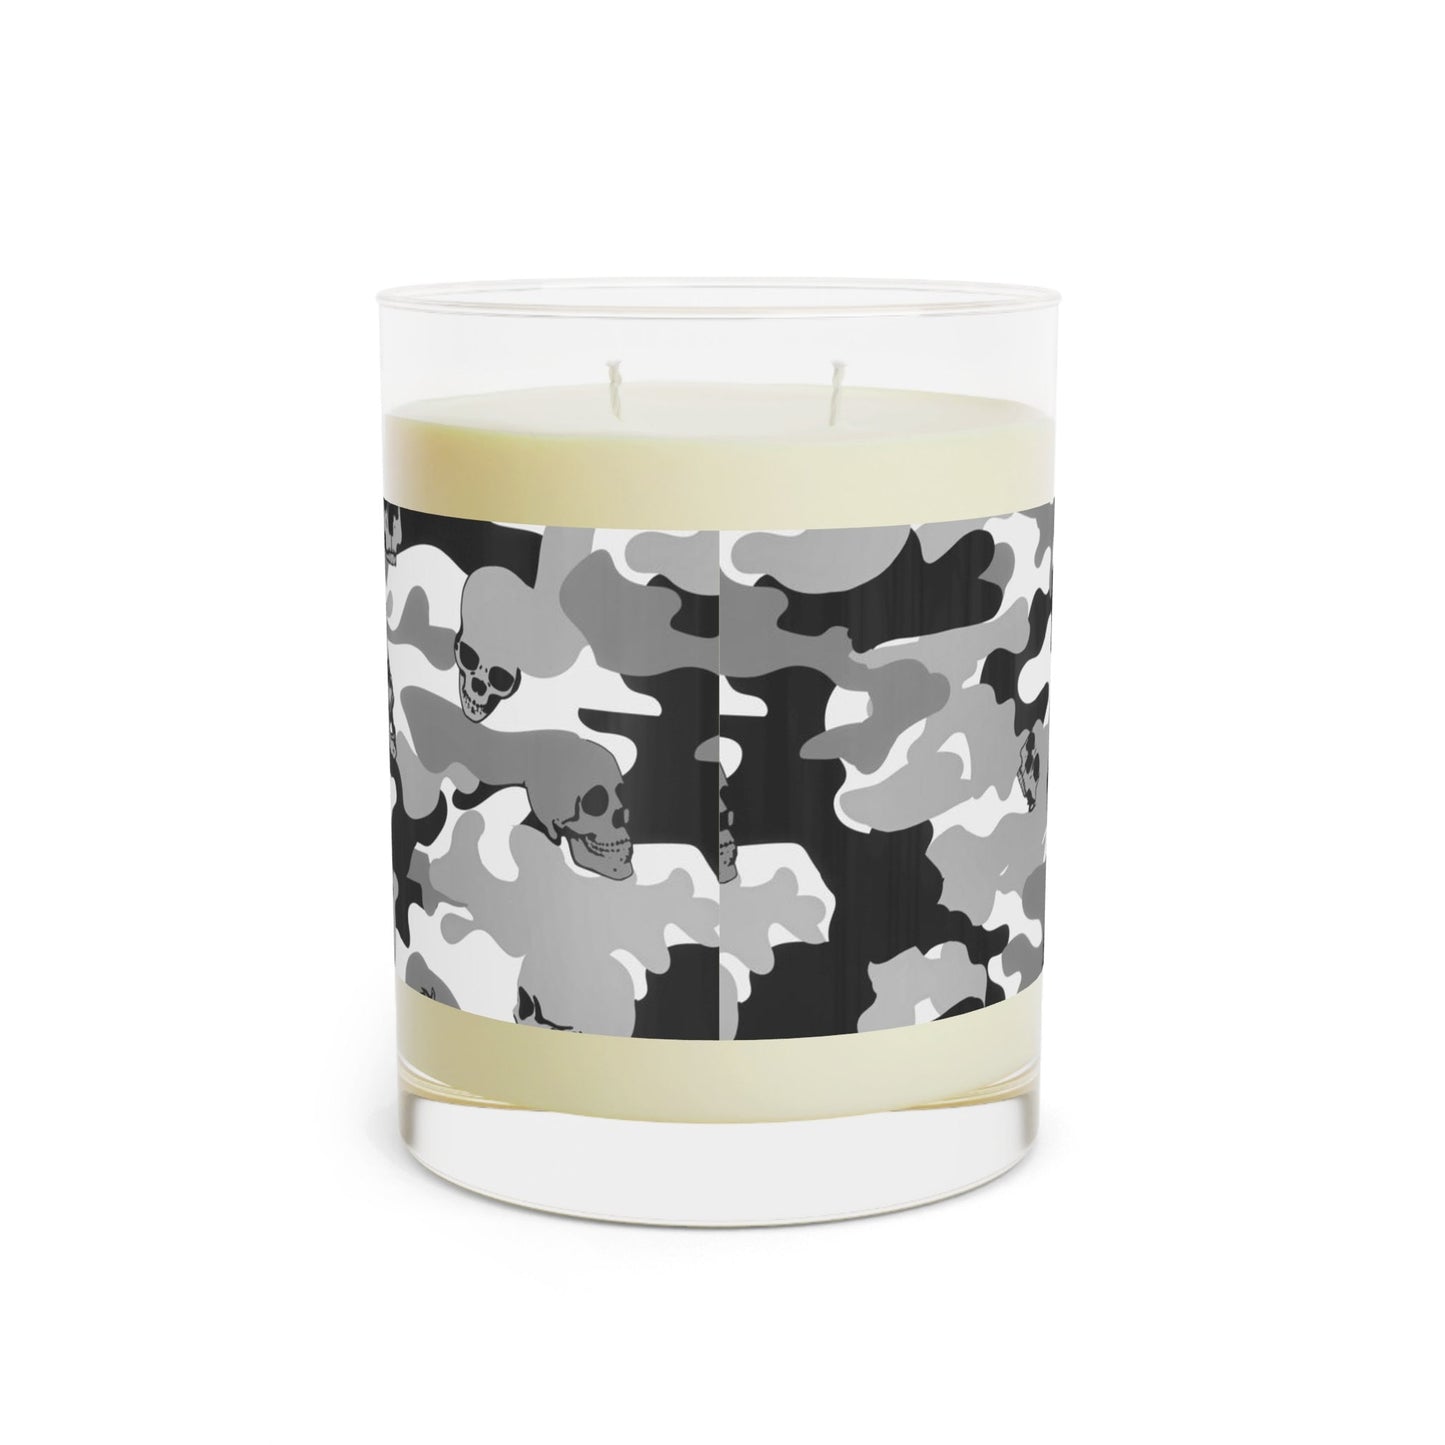 Camouflage Scented Candle - Full Glass, 11oz Sugar Skull Pattern Candle Gift